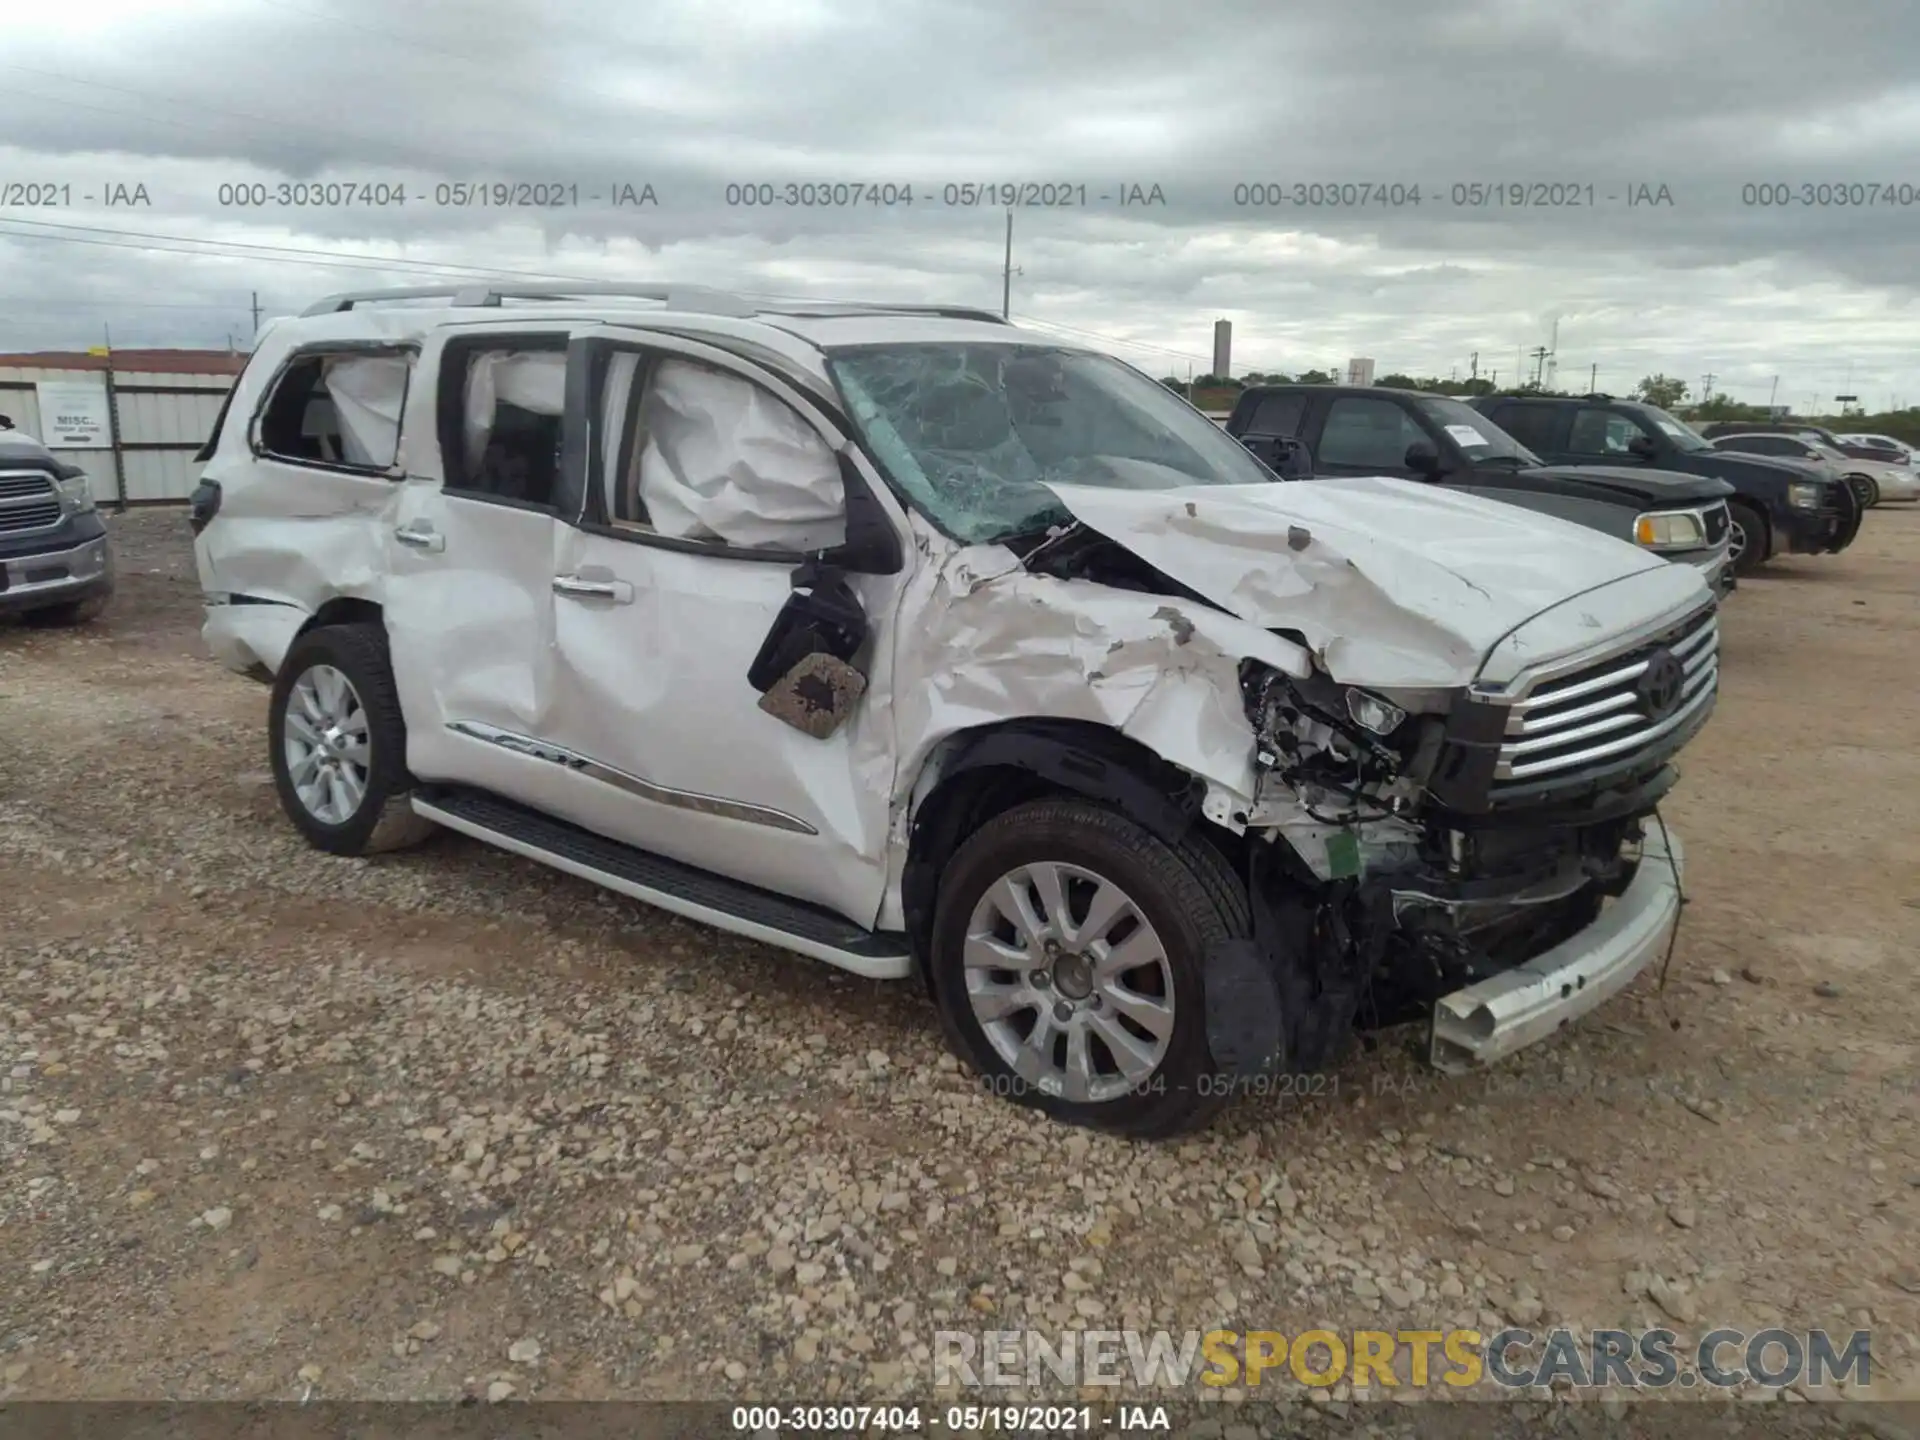 1 Photograph of a damaged car 5TDYY5G14LS074823 TOYOTA SEQUOIA 2020